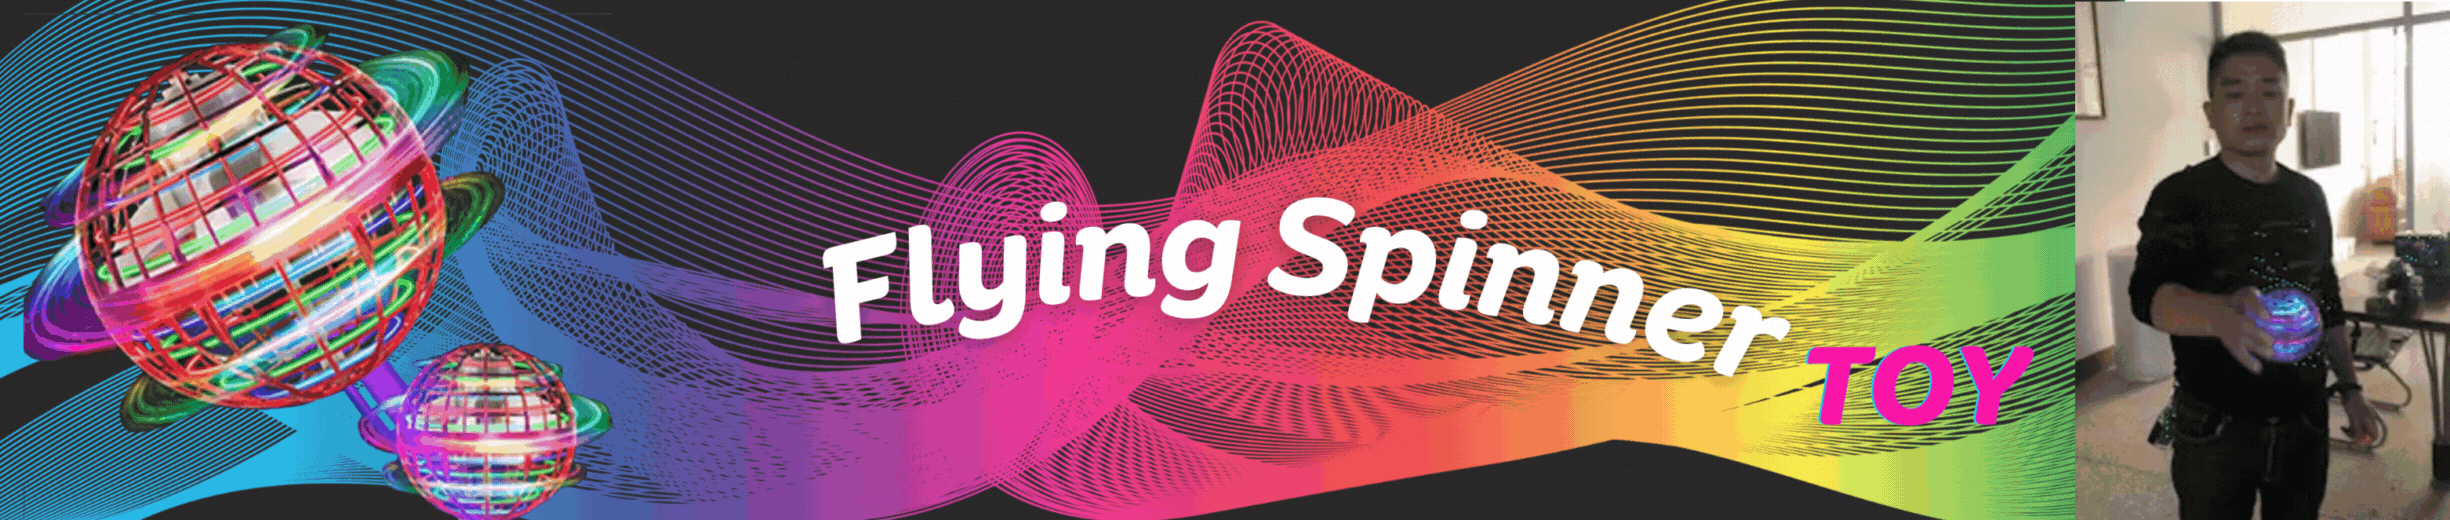 Flying Spinner Toy image with video in website banner.